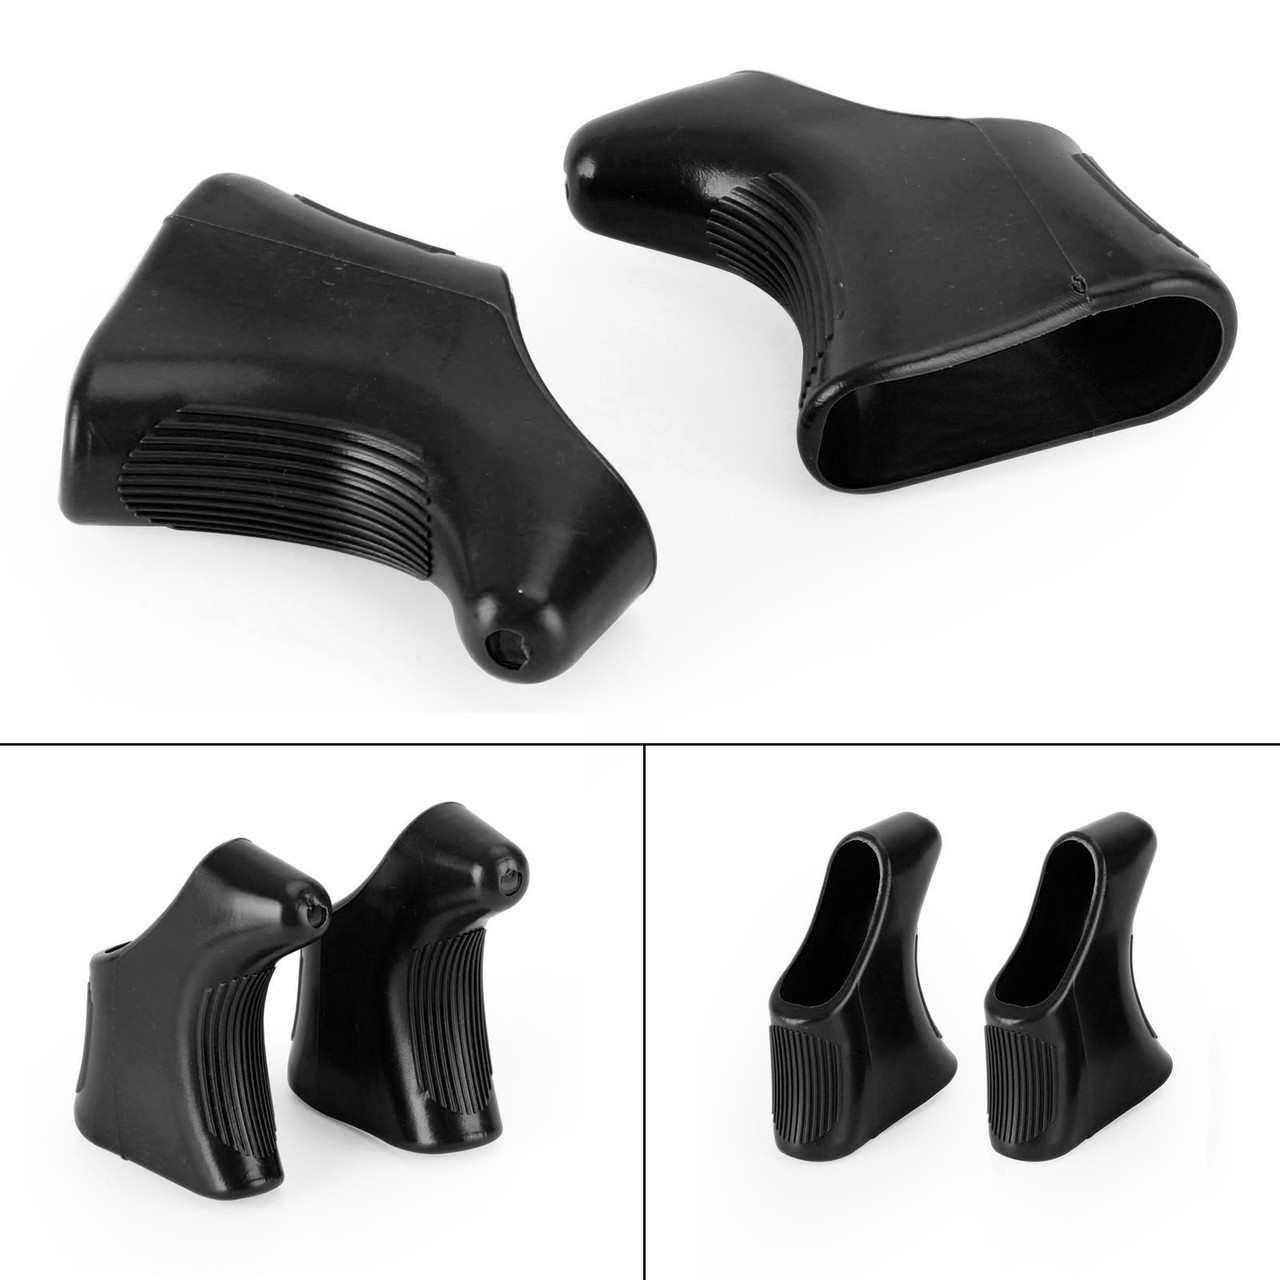 One Pair of Shield Brake Lever Hoods For Super record Black